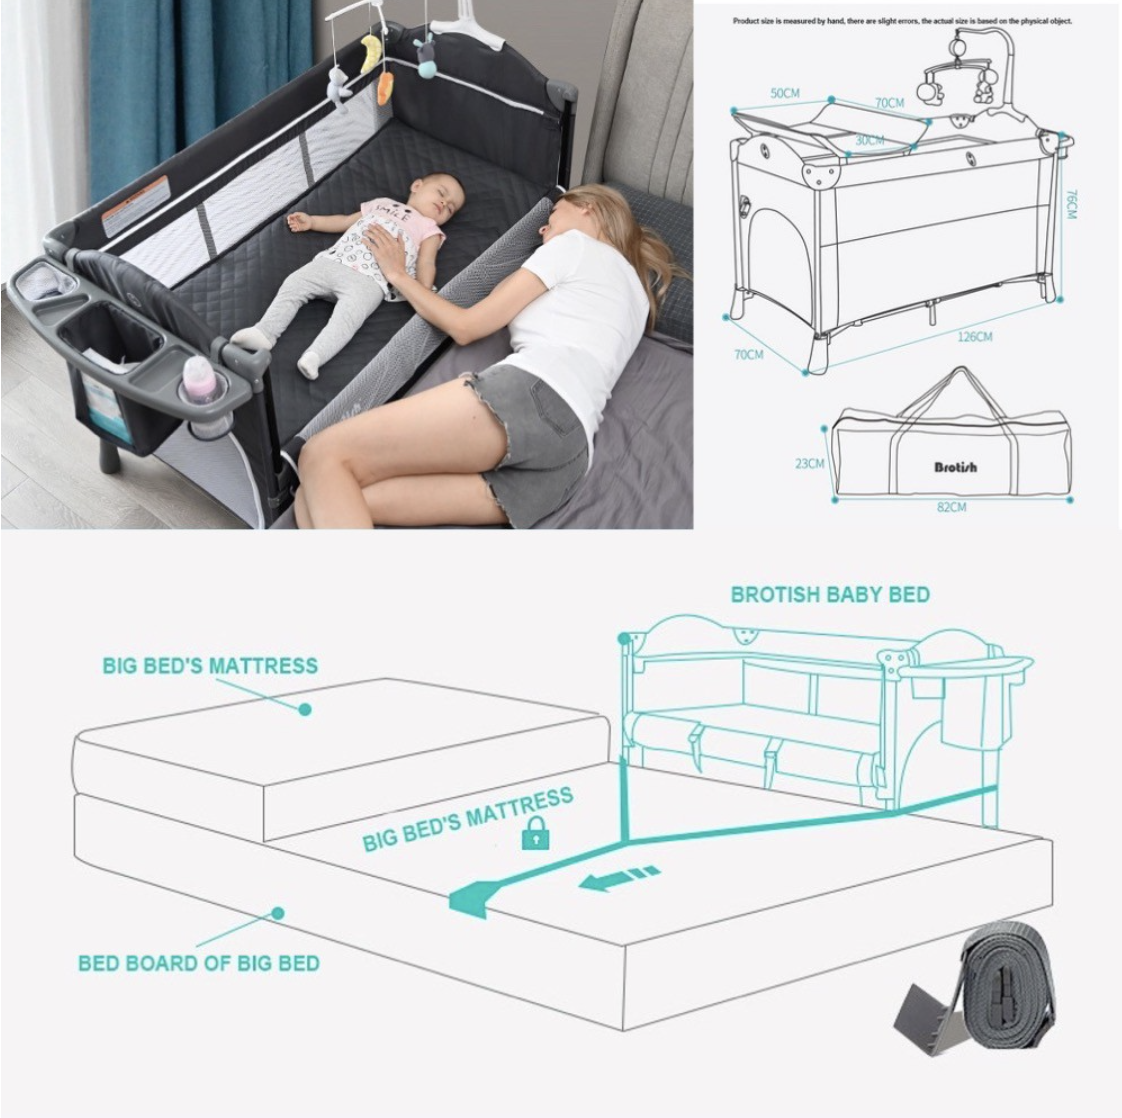 Brotish Foldable 2 Layers Playpen with Cradle Function 4 Adjustable Layer Co-Sleeper